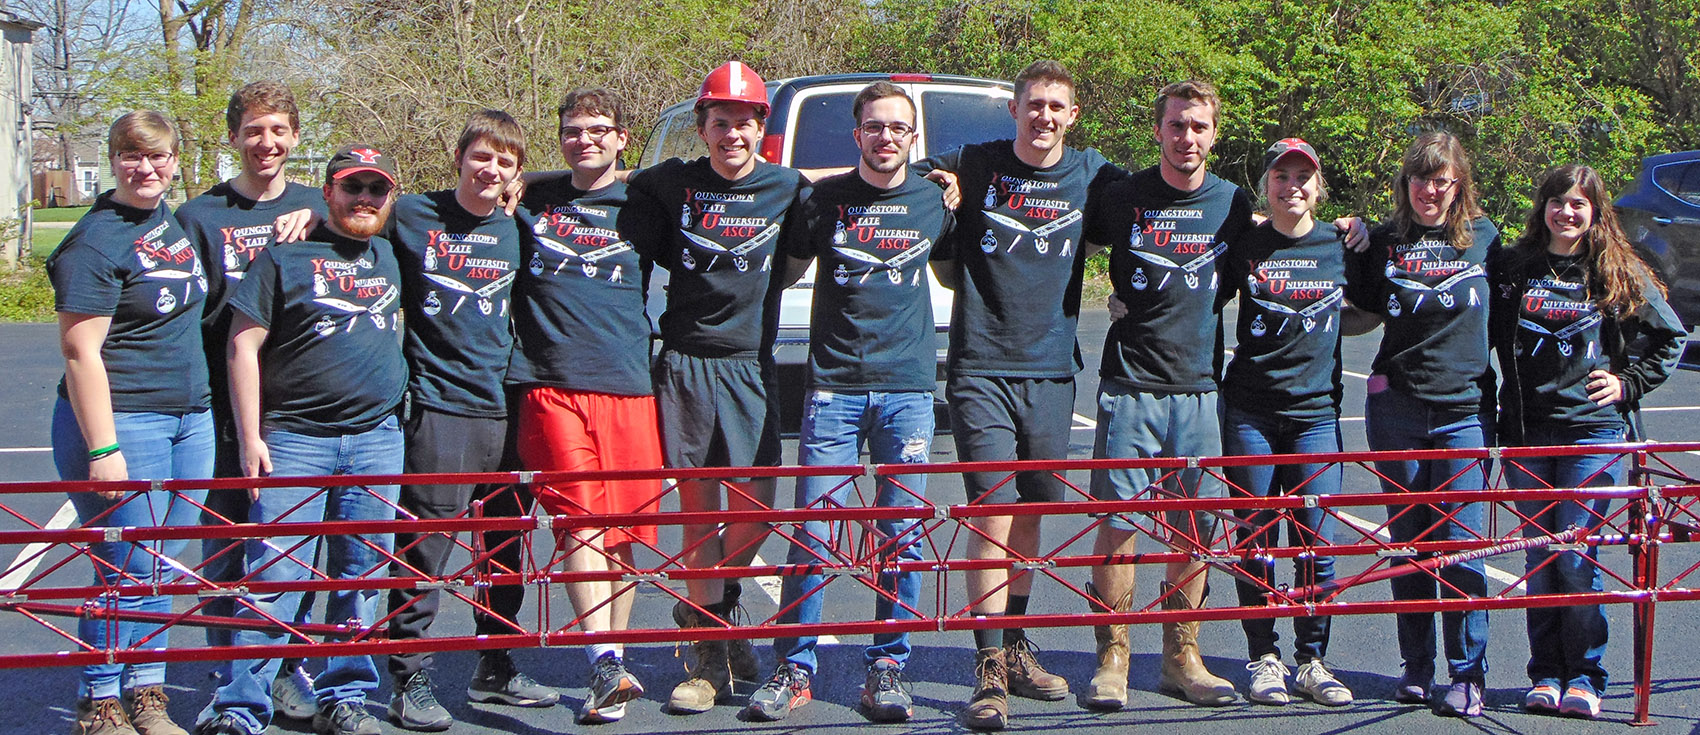 Members of the YSU team at  the regional ASCE Student Steel Bridge Competition